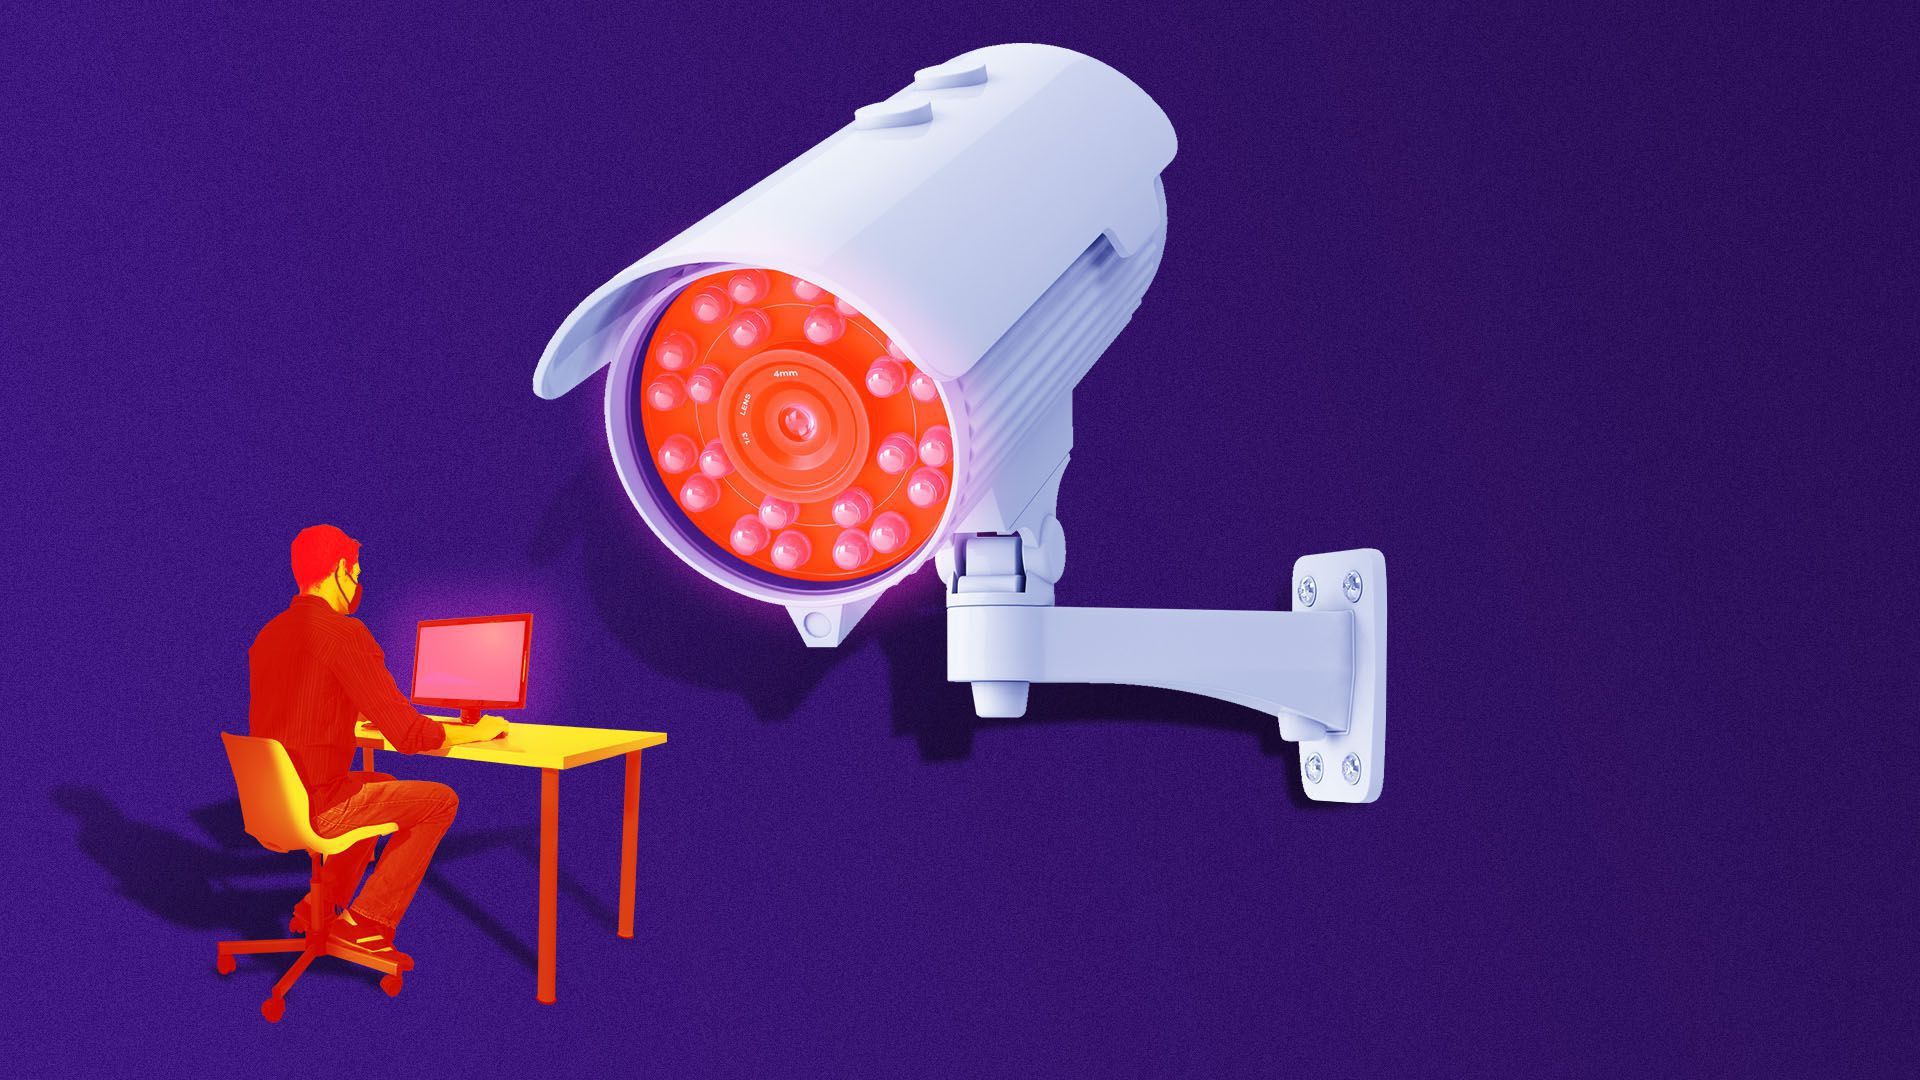 Illustration of a surveillance camera and someone at a desk